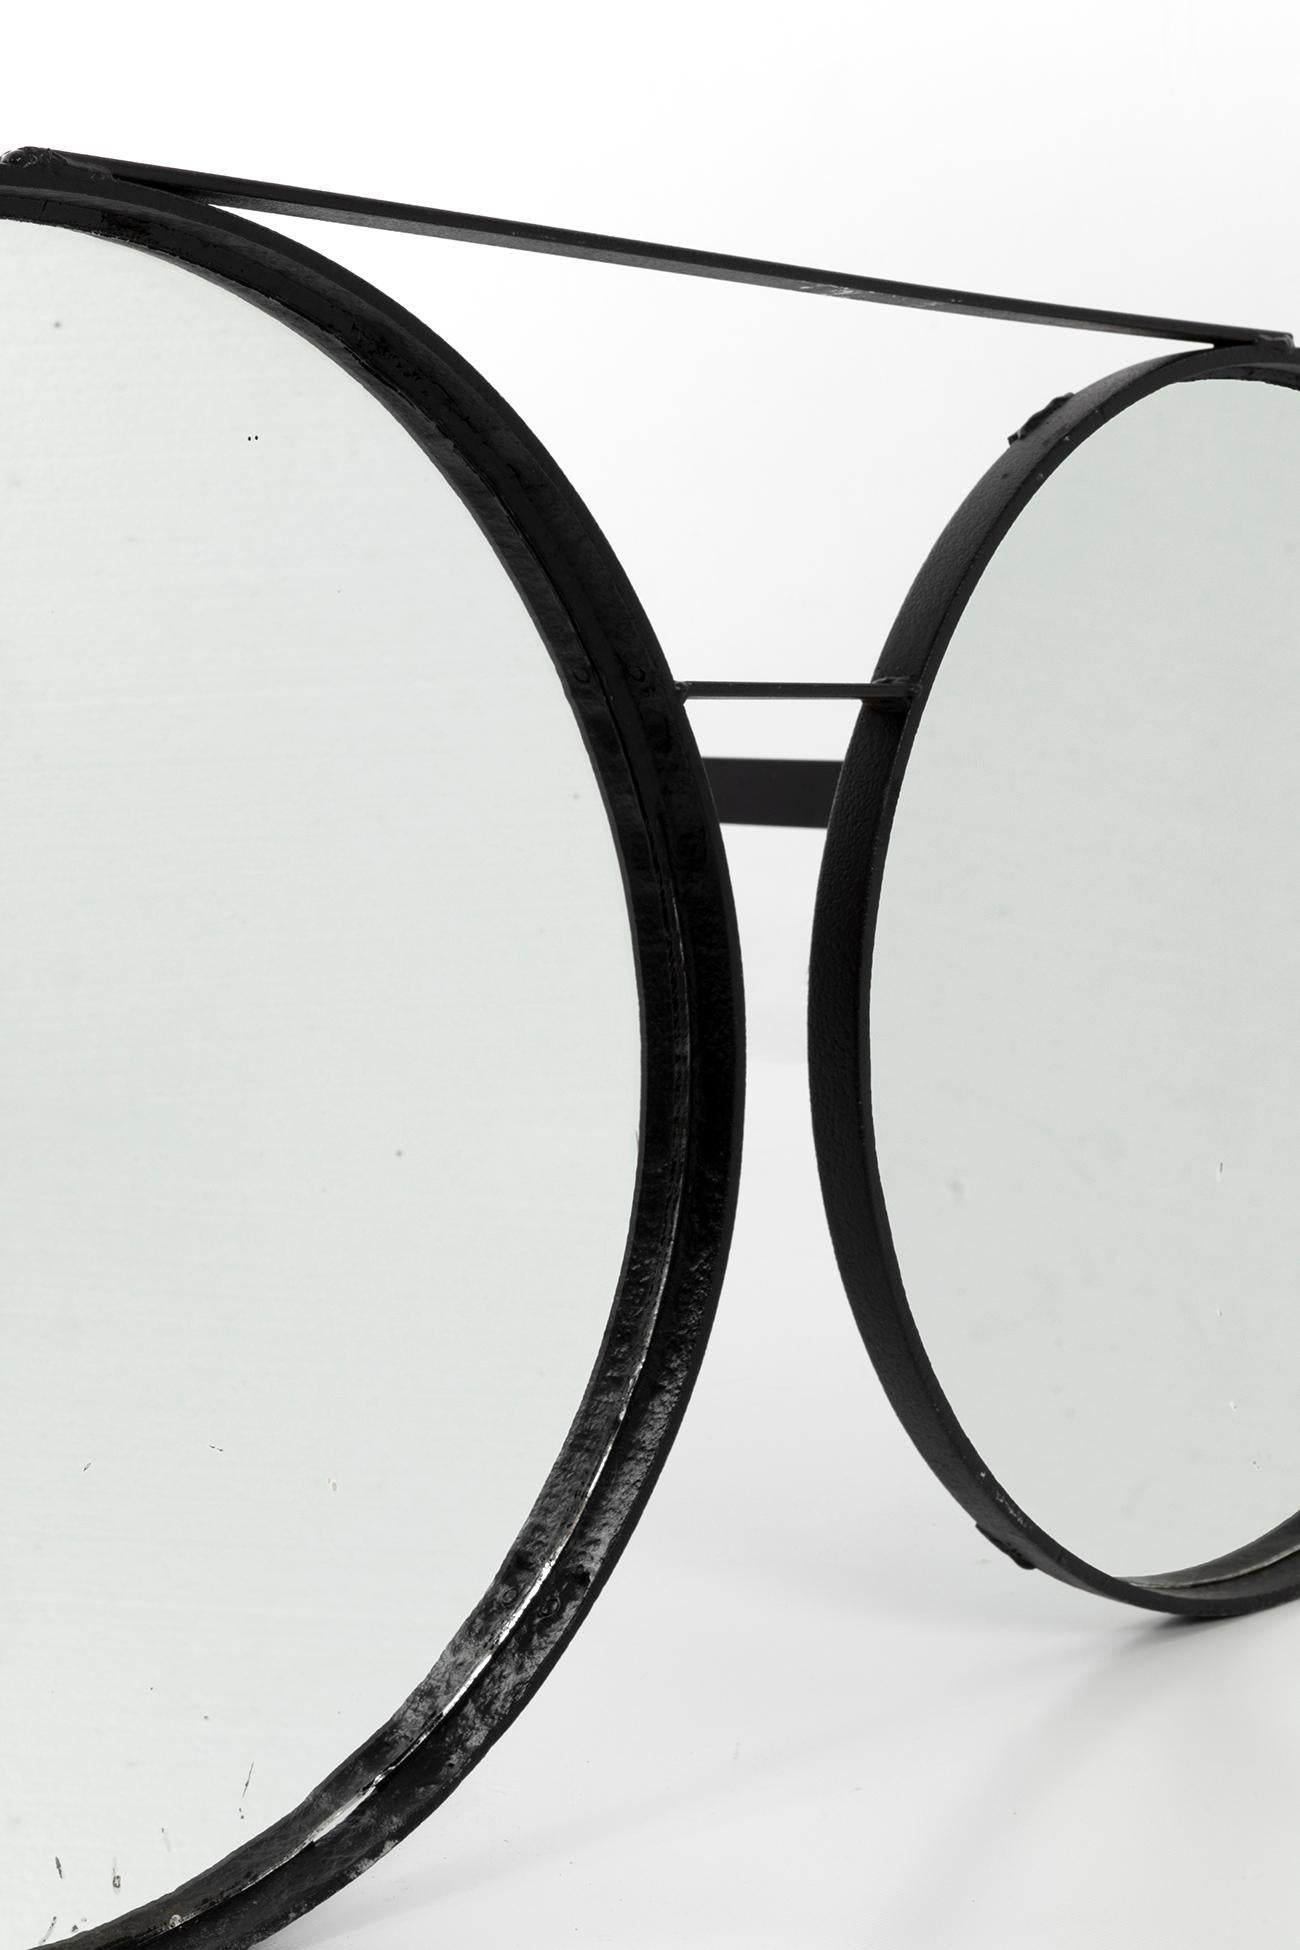 British Pair of Handcrafted Oversized Glasses